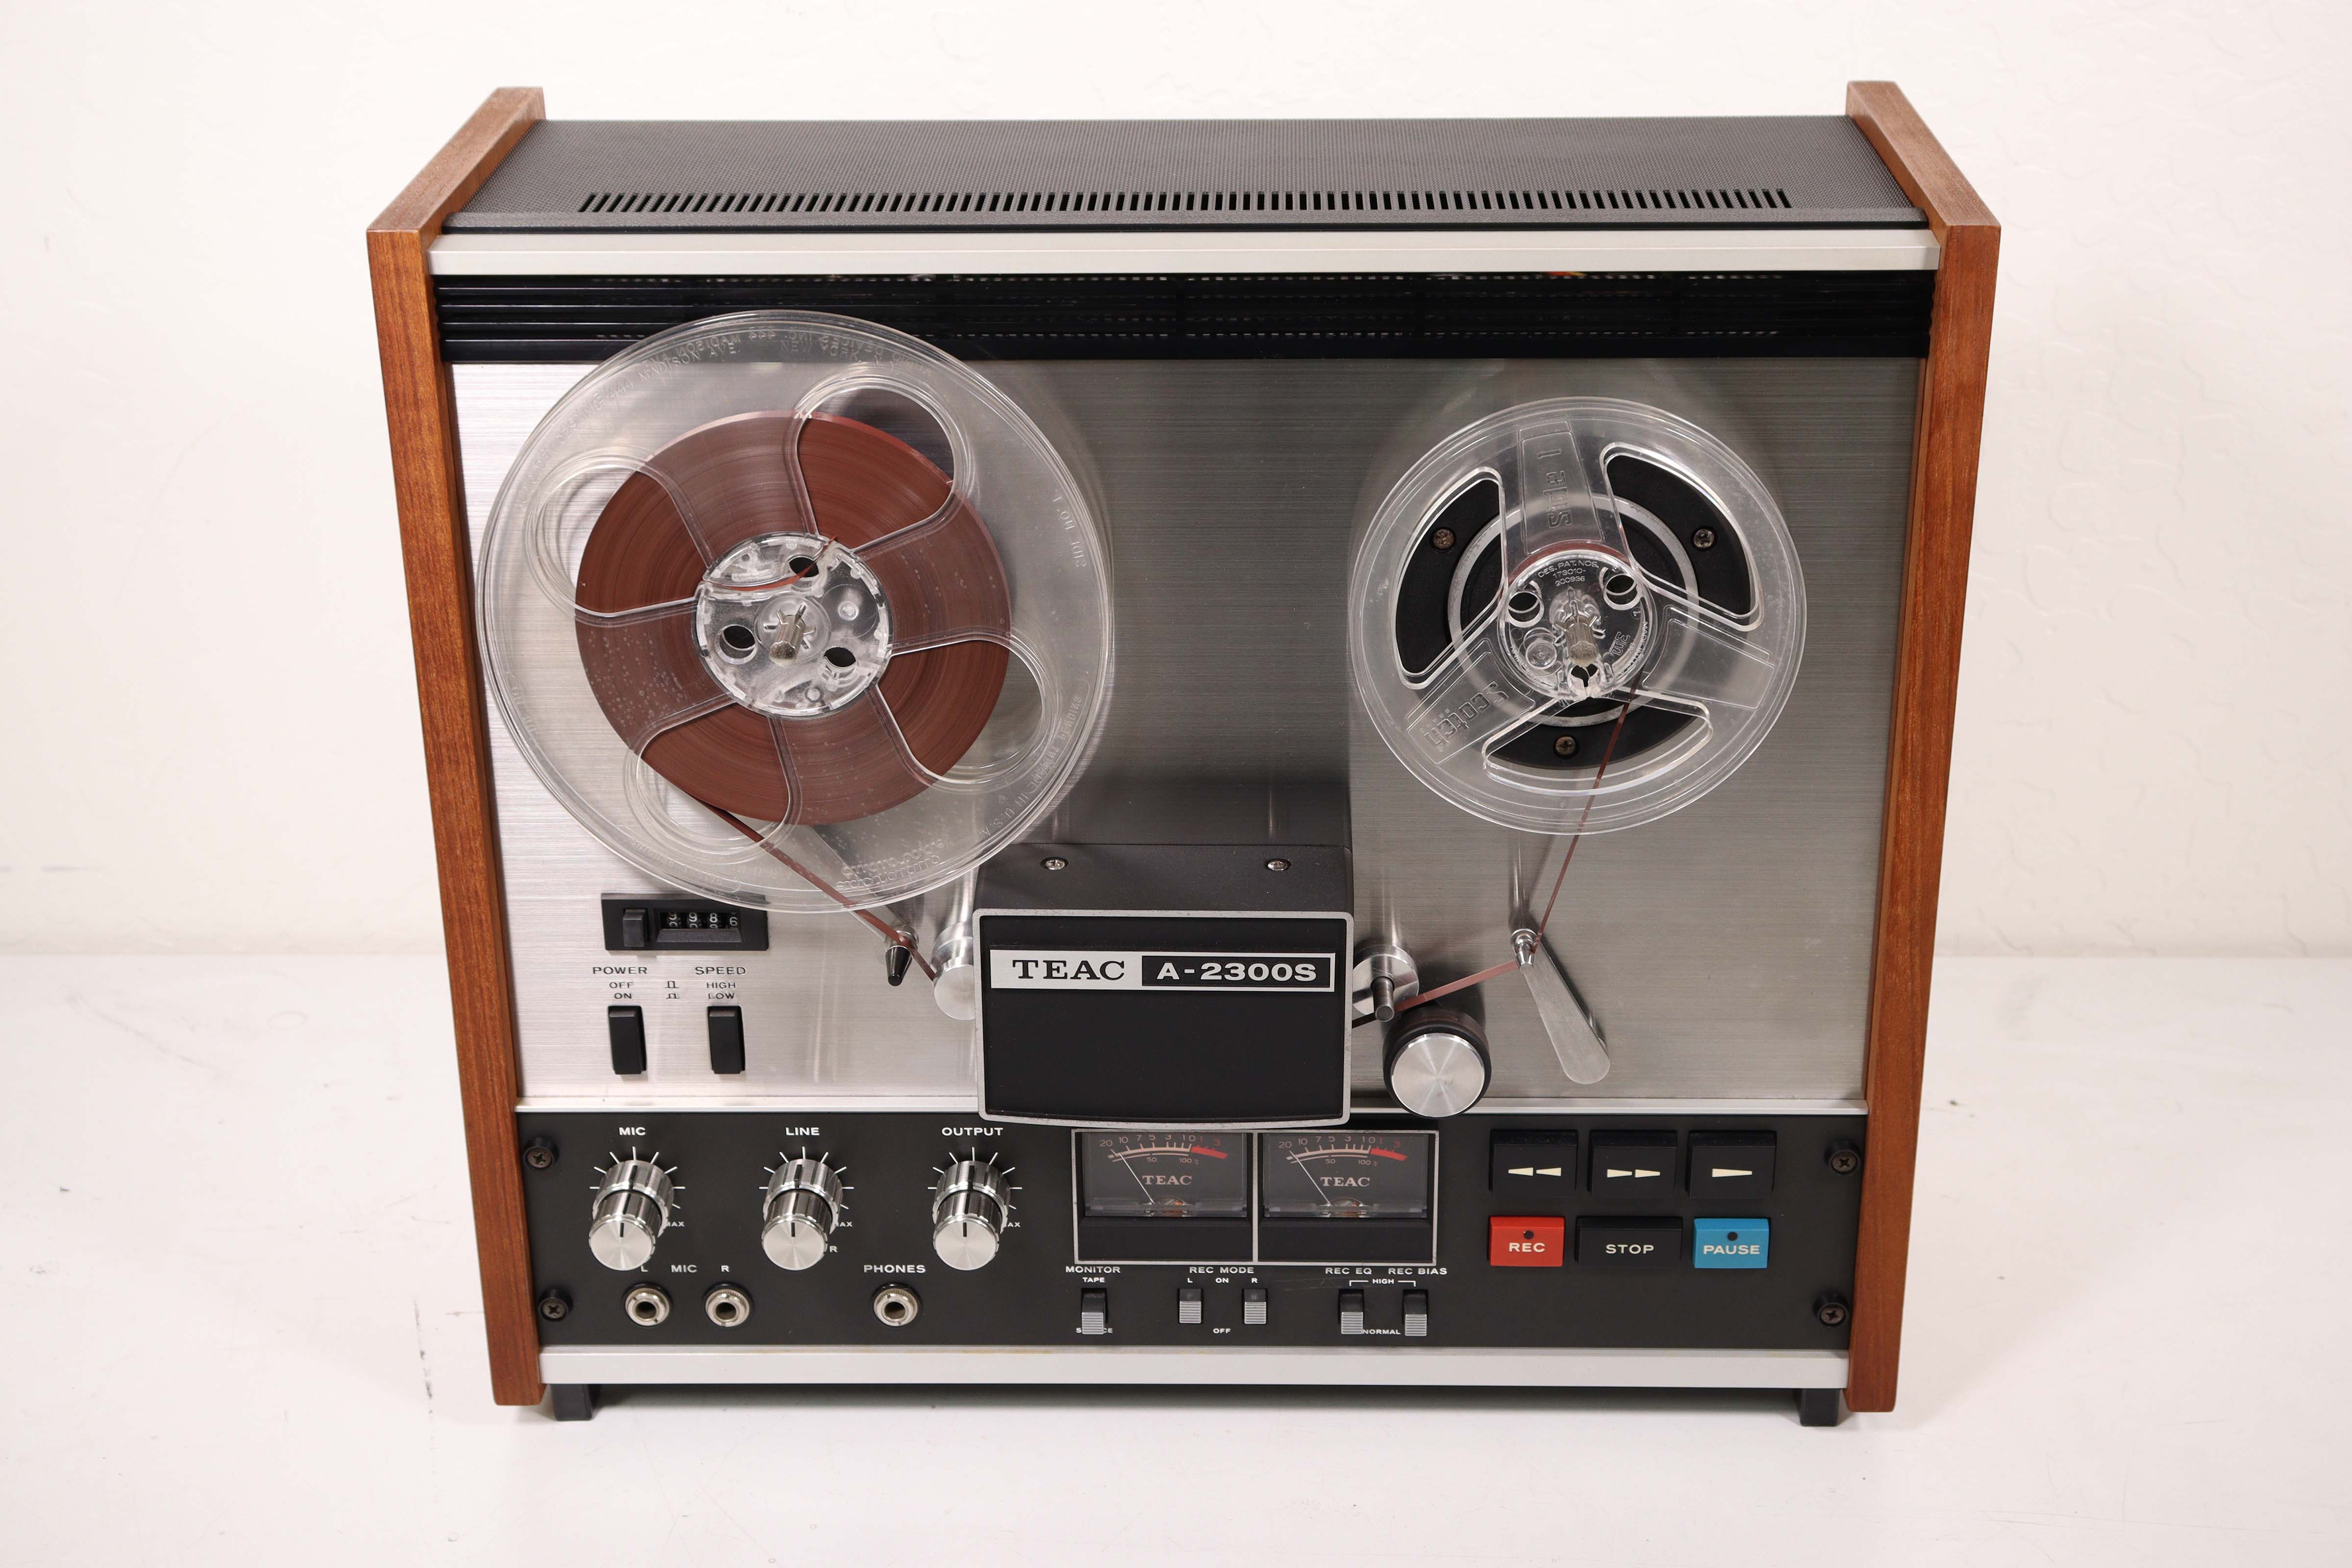 TEAC A-2300SX 2T 60Hz Reel To Reel Stereo Tape Deck Player Free